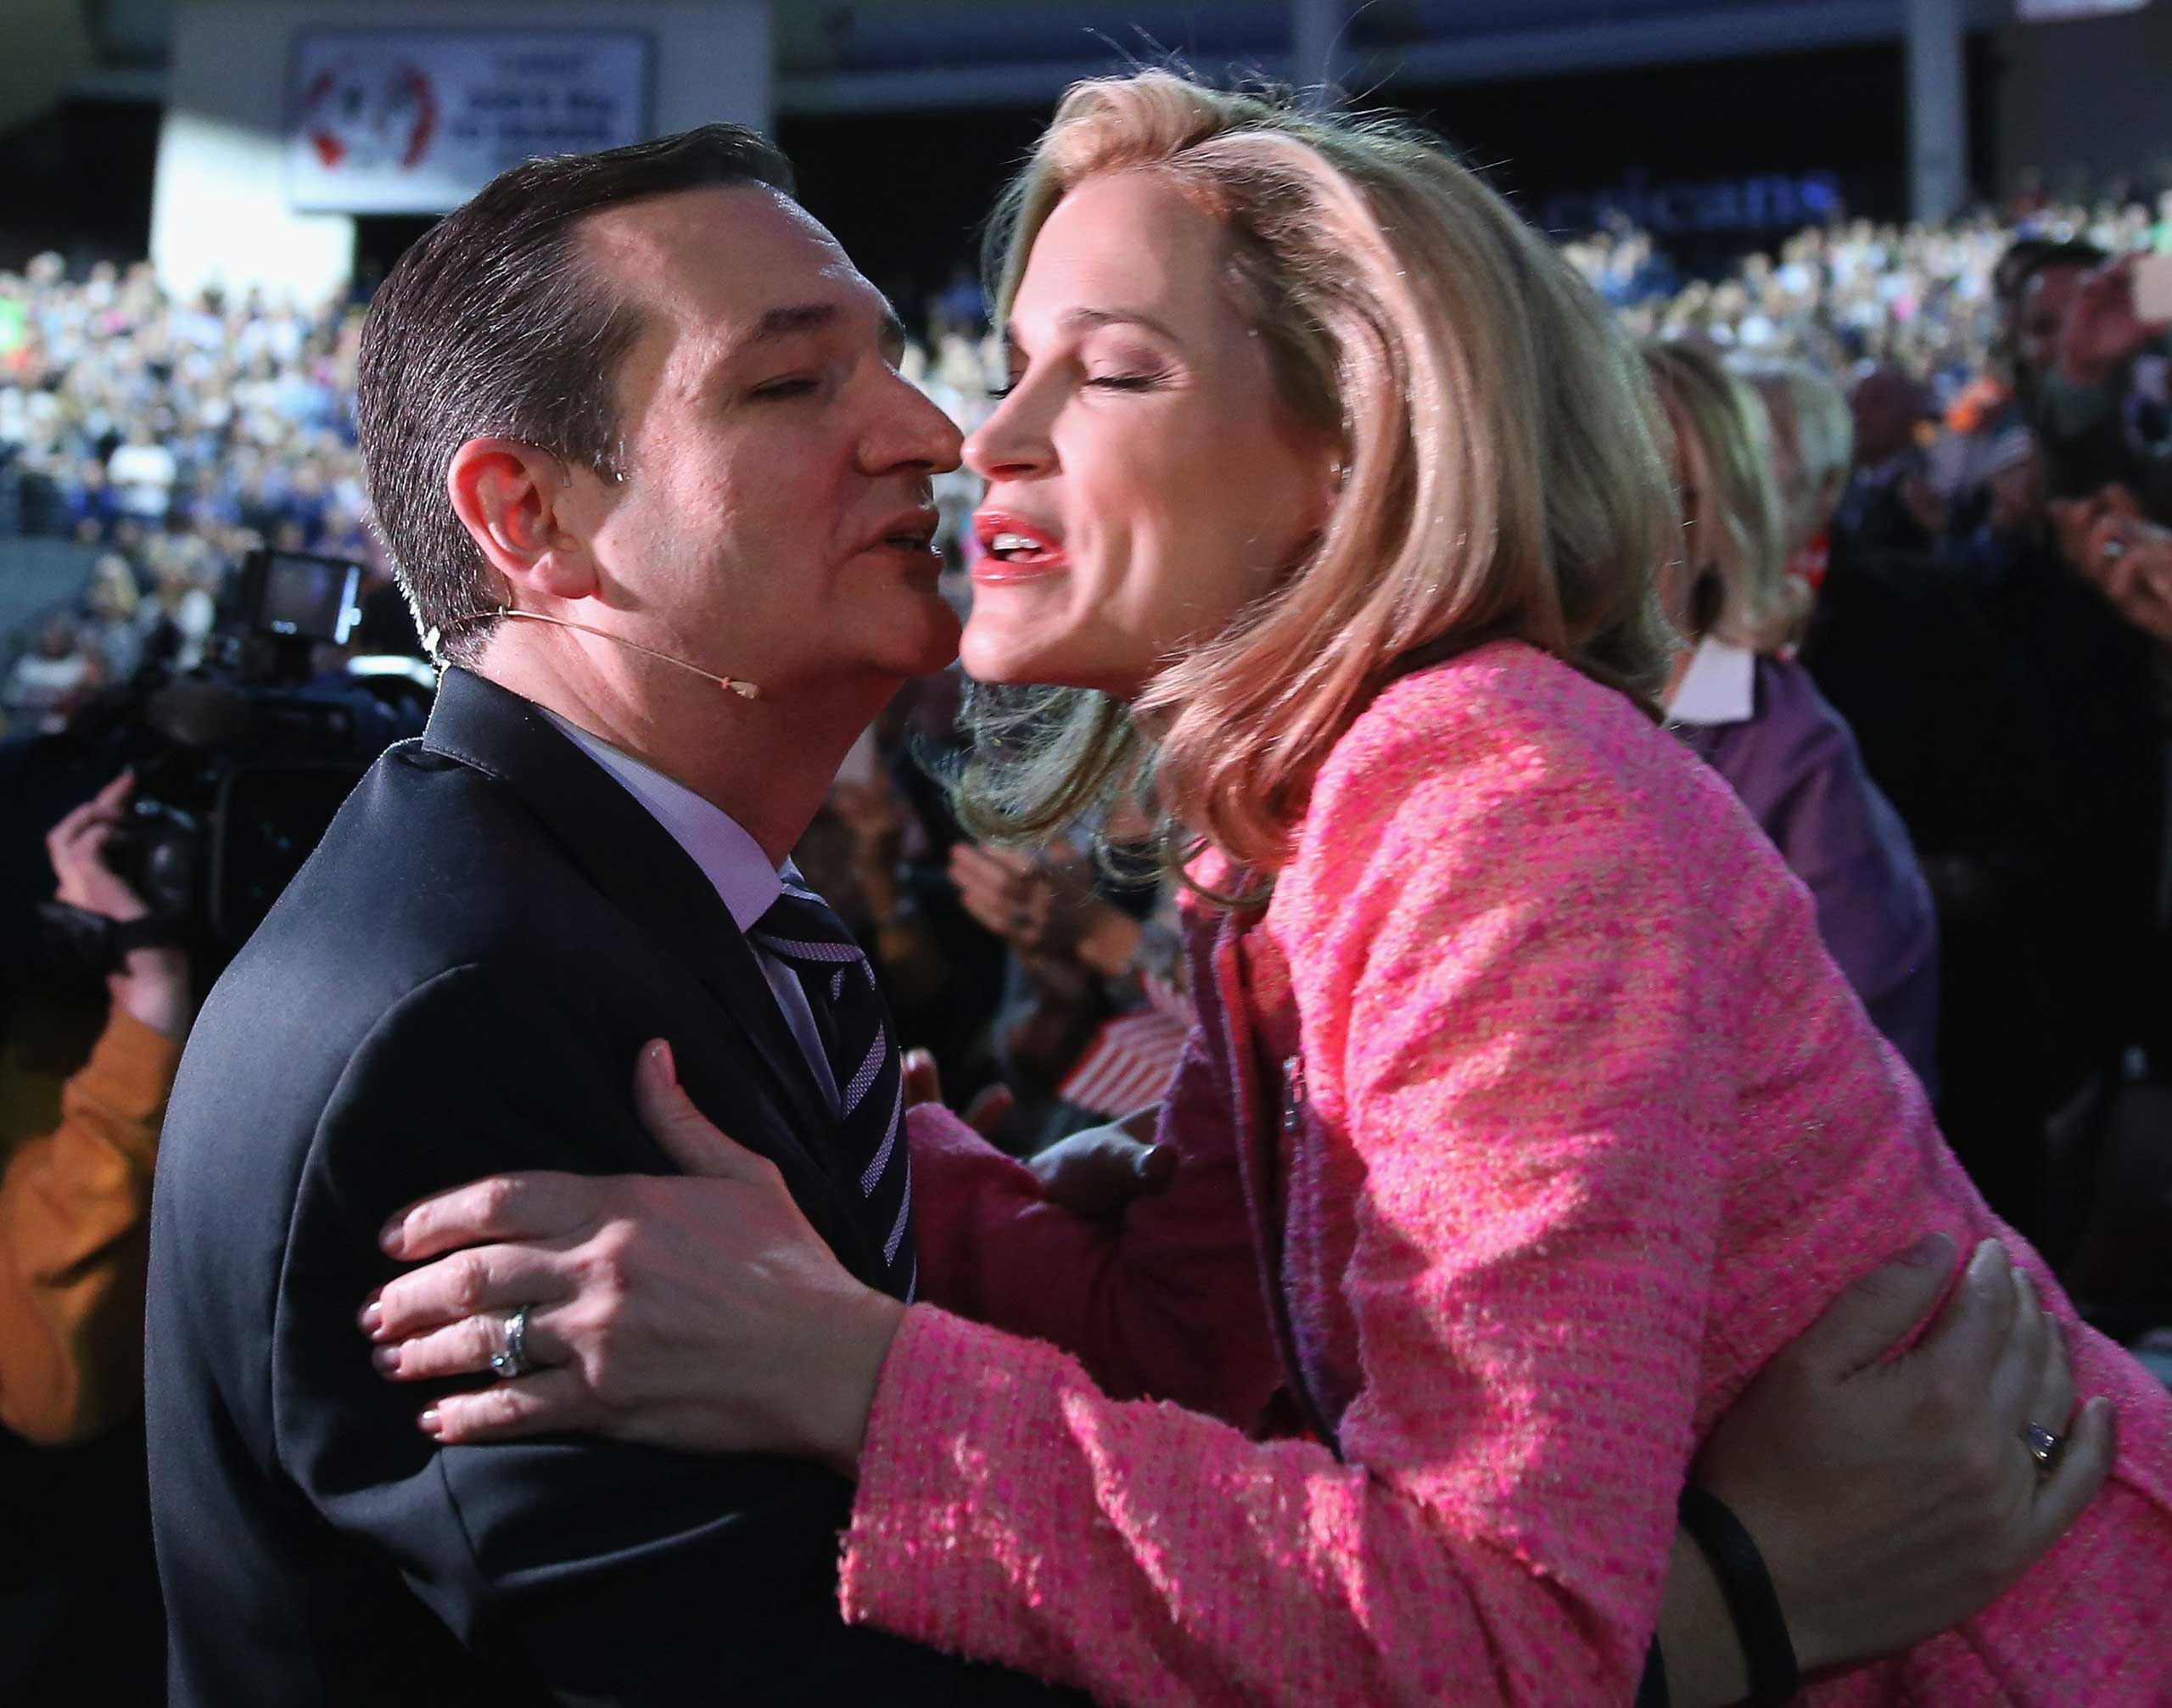 Texas Sen. Ted Cruz kisses his wife before walking onstage to speak at Liberty University in Lynchburg, Va., to announce his presidential candidacy on March 23.